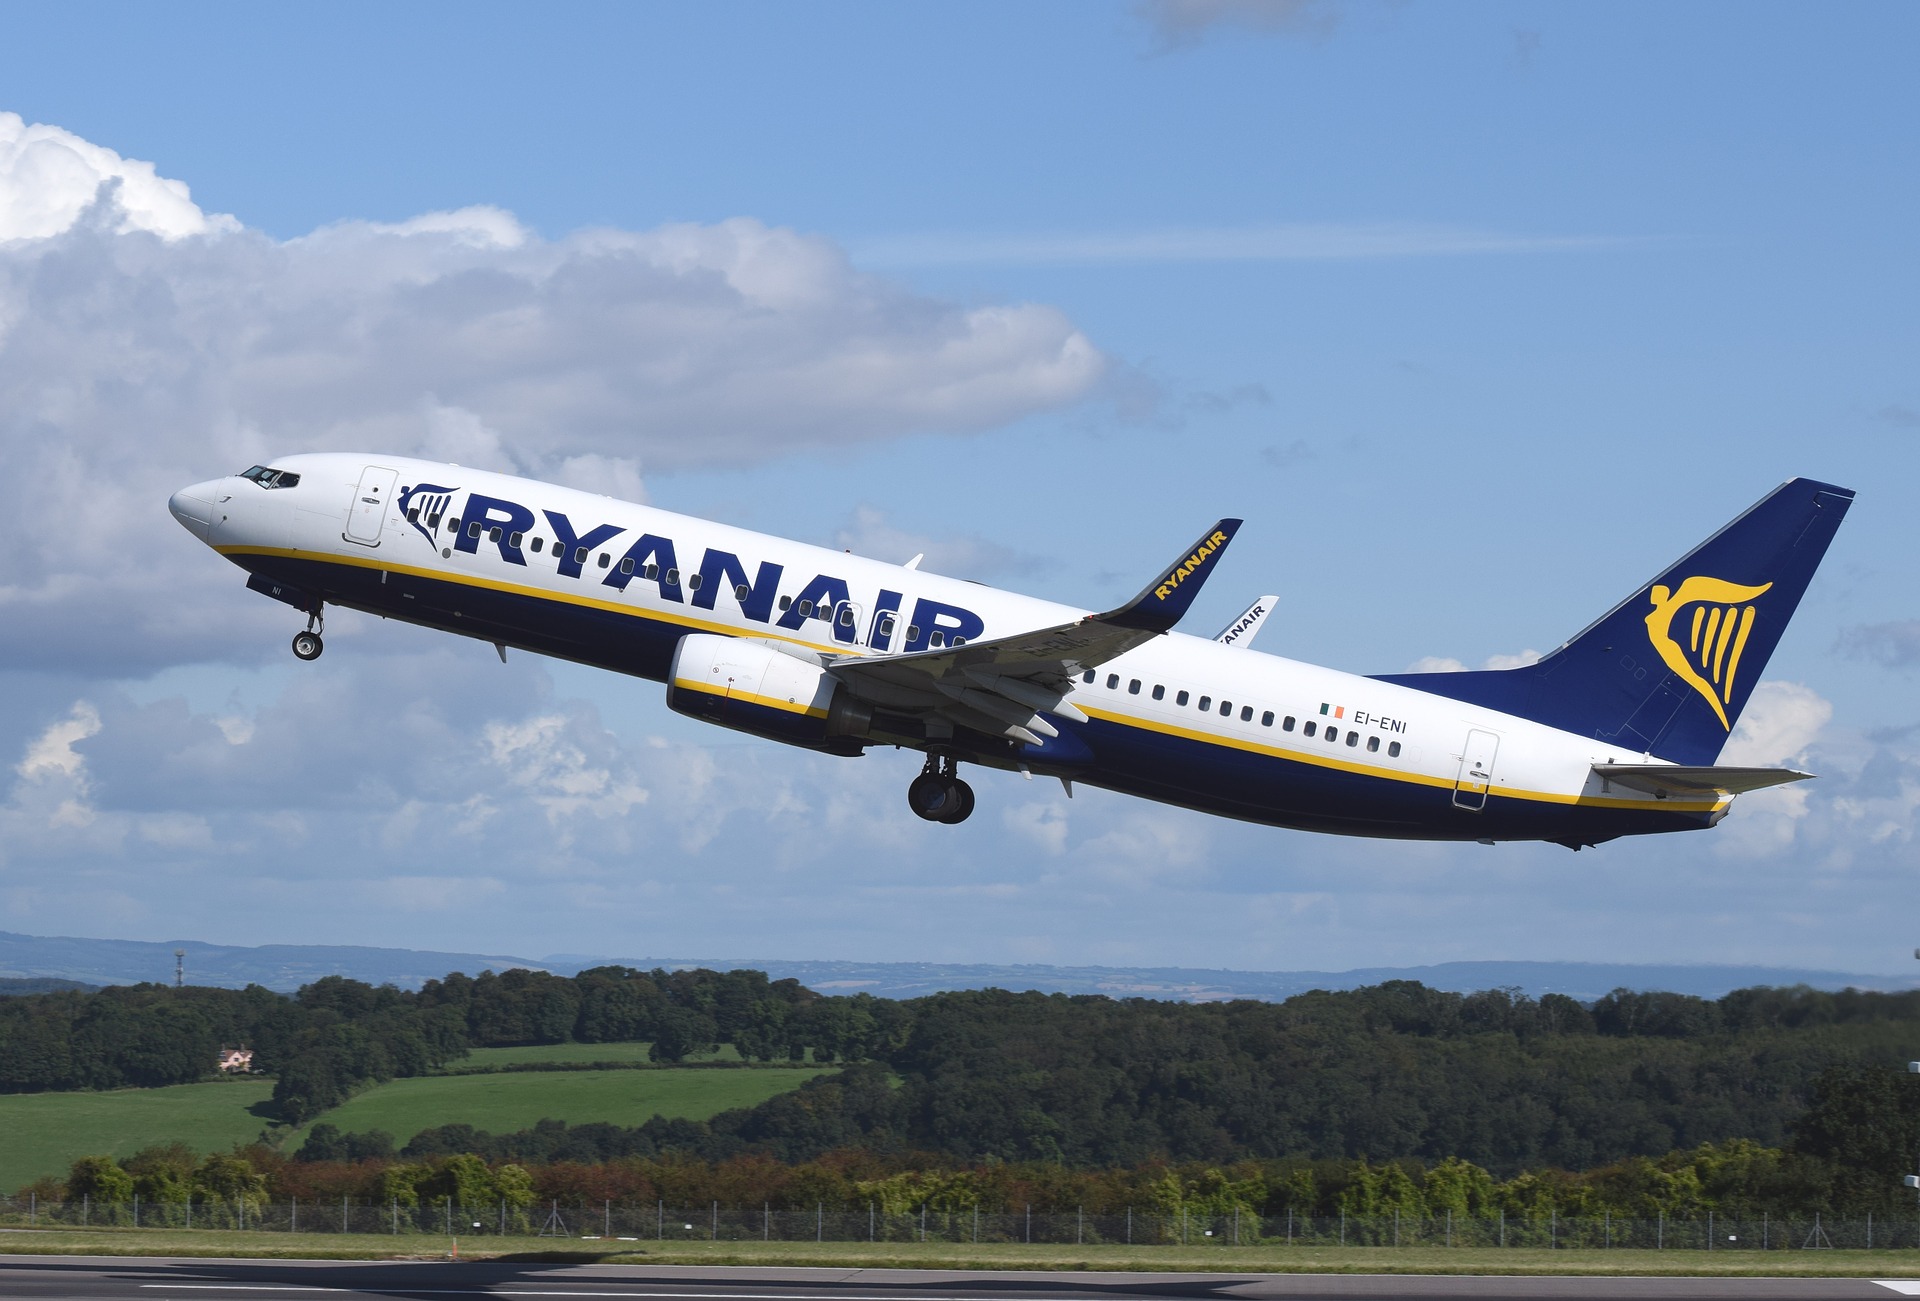 Flying with Ryanair? Here's what you need to know about their policy so that you can bring your portable oxygen concentrator on your next flight.